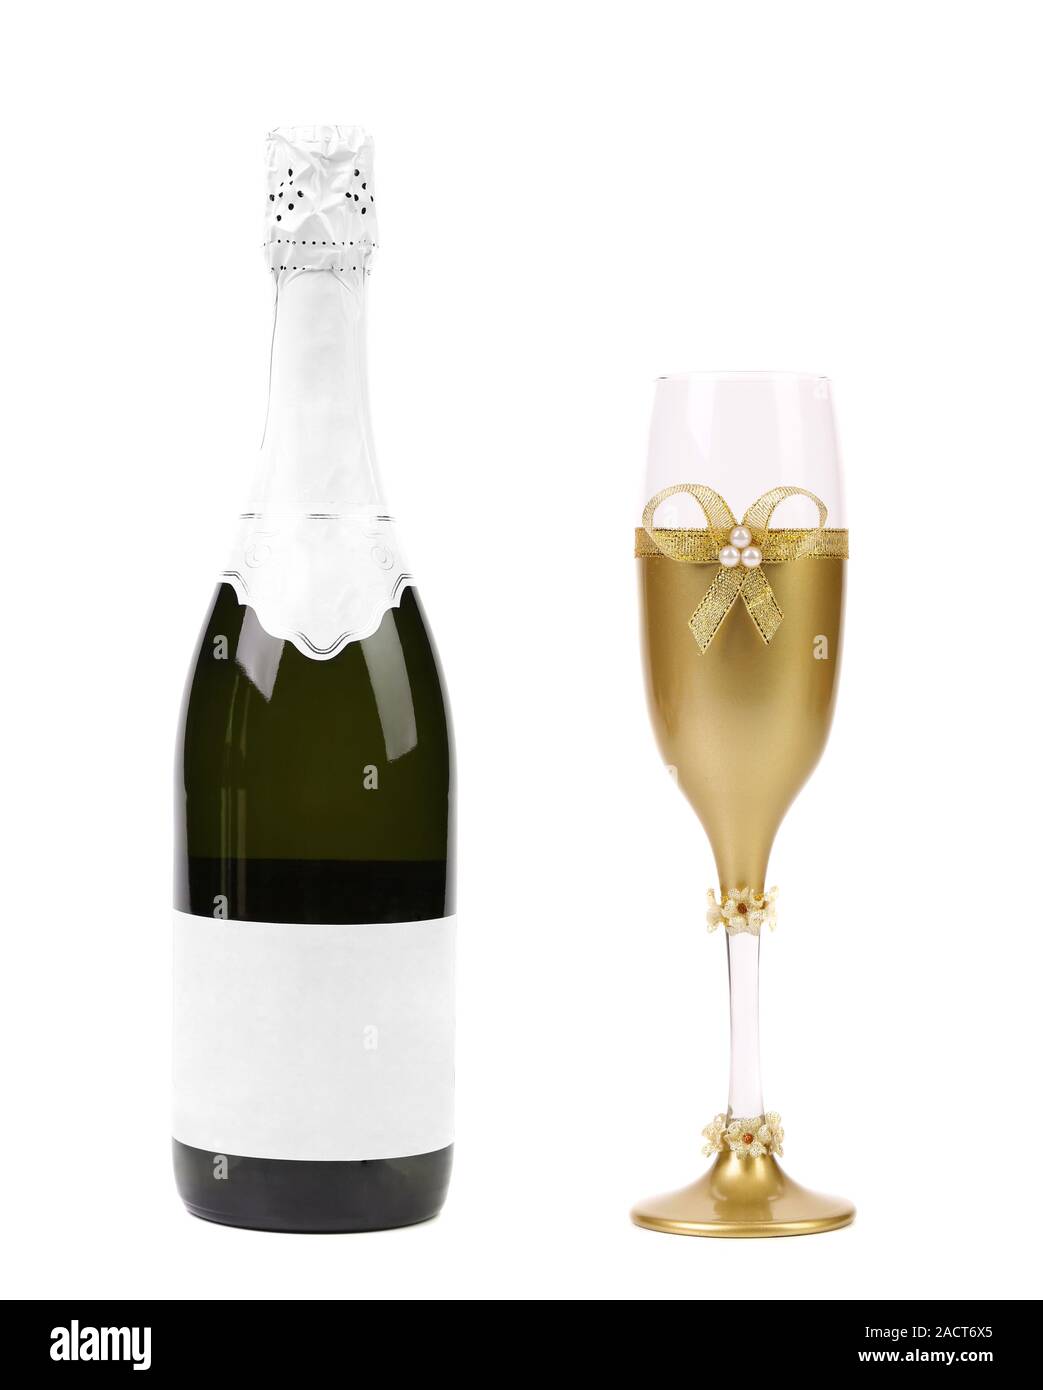 Champagne bottle and glass. Stock Photo